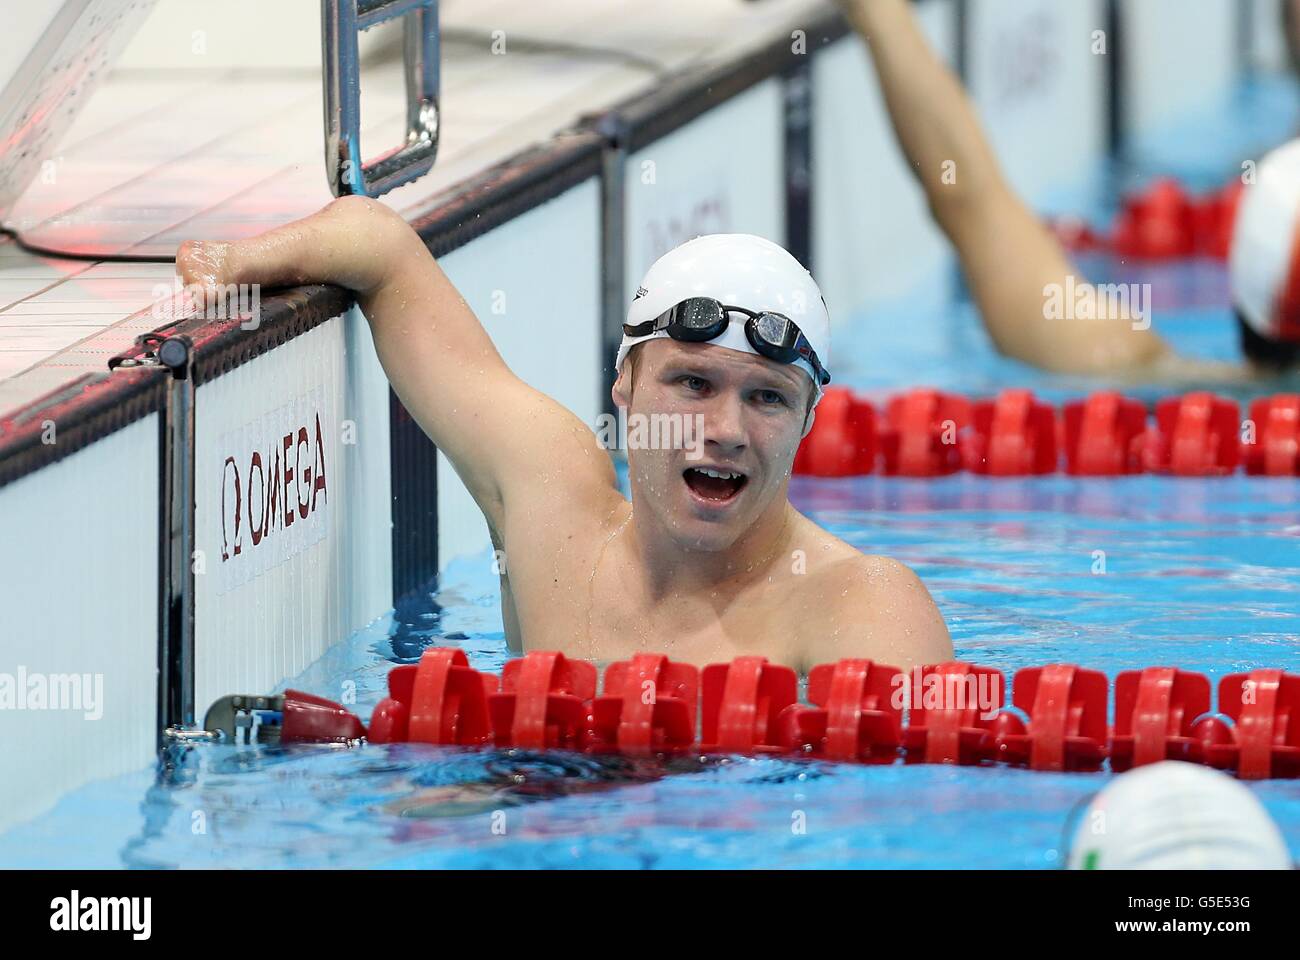 New Zealand's Cameron Leslie after winning the Men's 150m Ind. Medley - SM4 final at the Aquatics Centre, London. Stock Photo